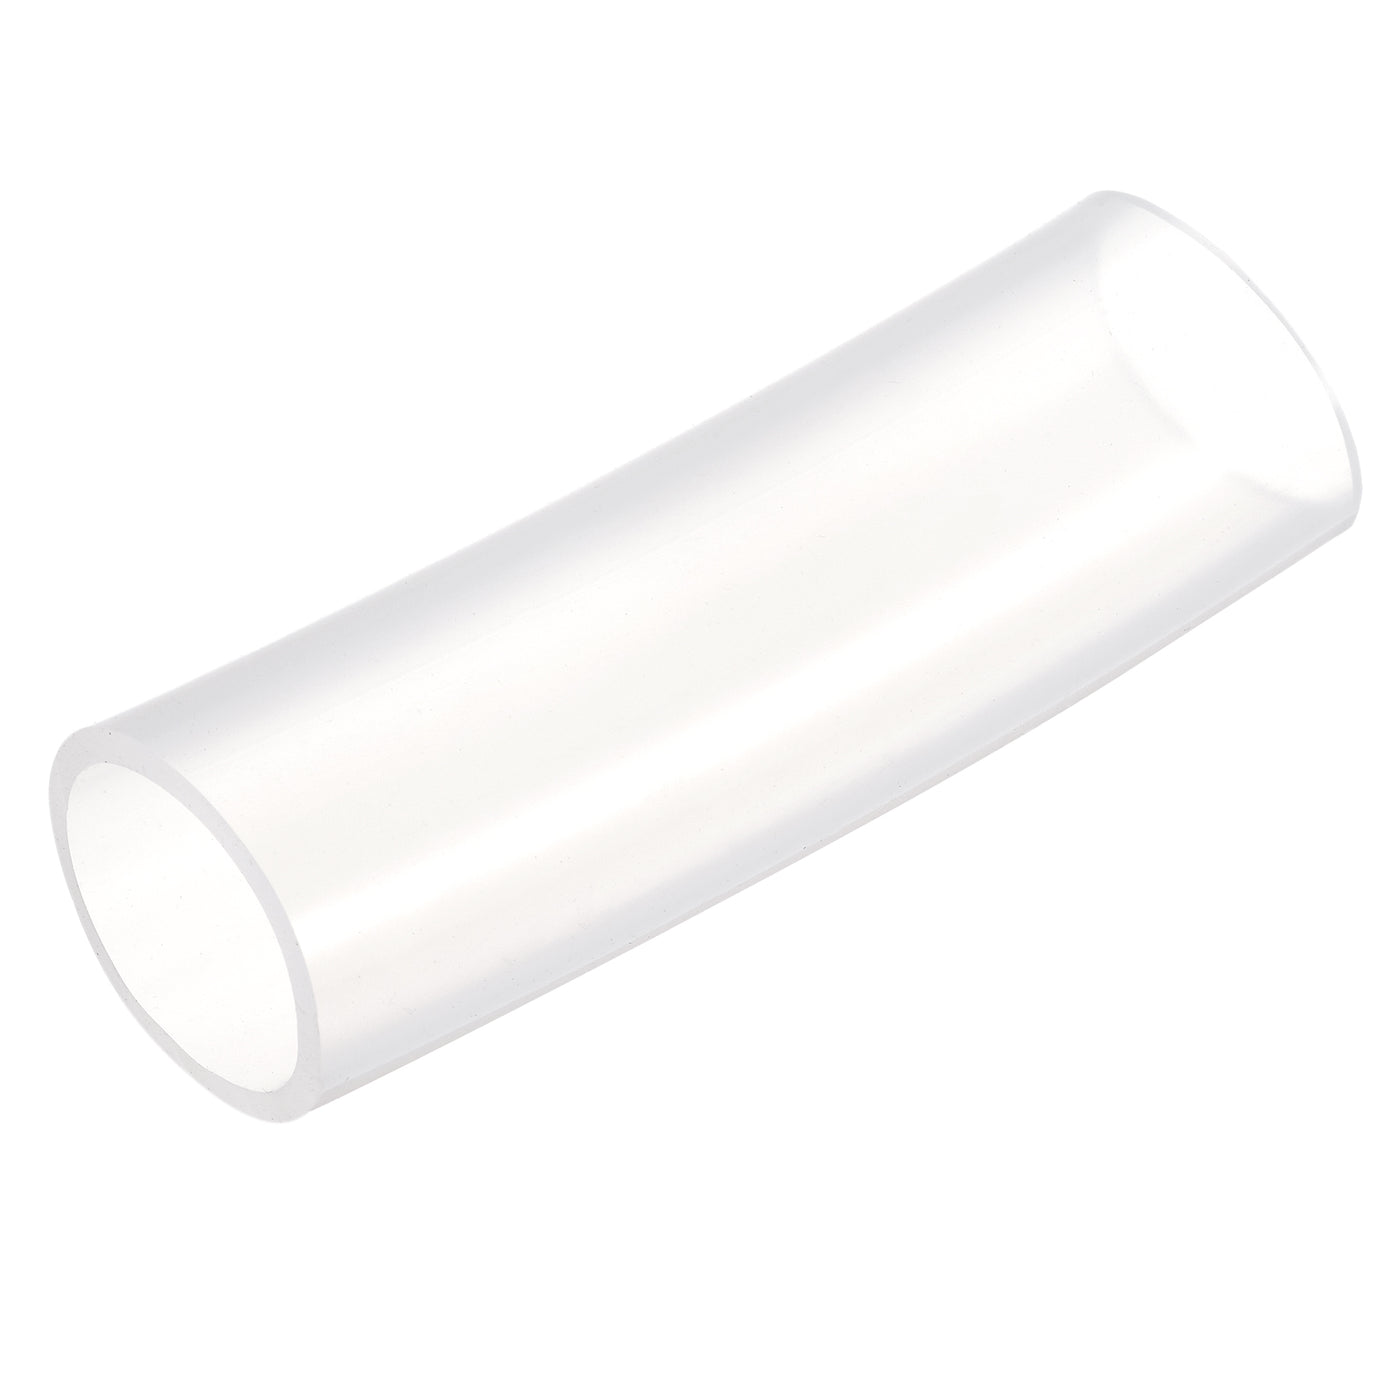 uxcell Uxcell Silicone Tubing 3/16" ID, 27/64" OD 1Pcs 0.33 Ft for Pump Transfer, Transparent